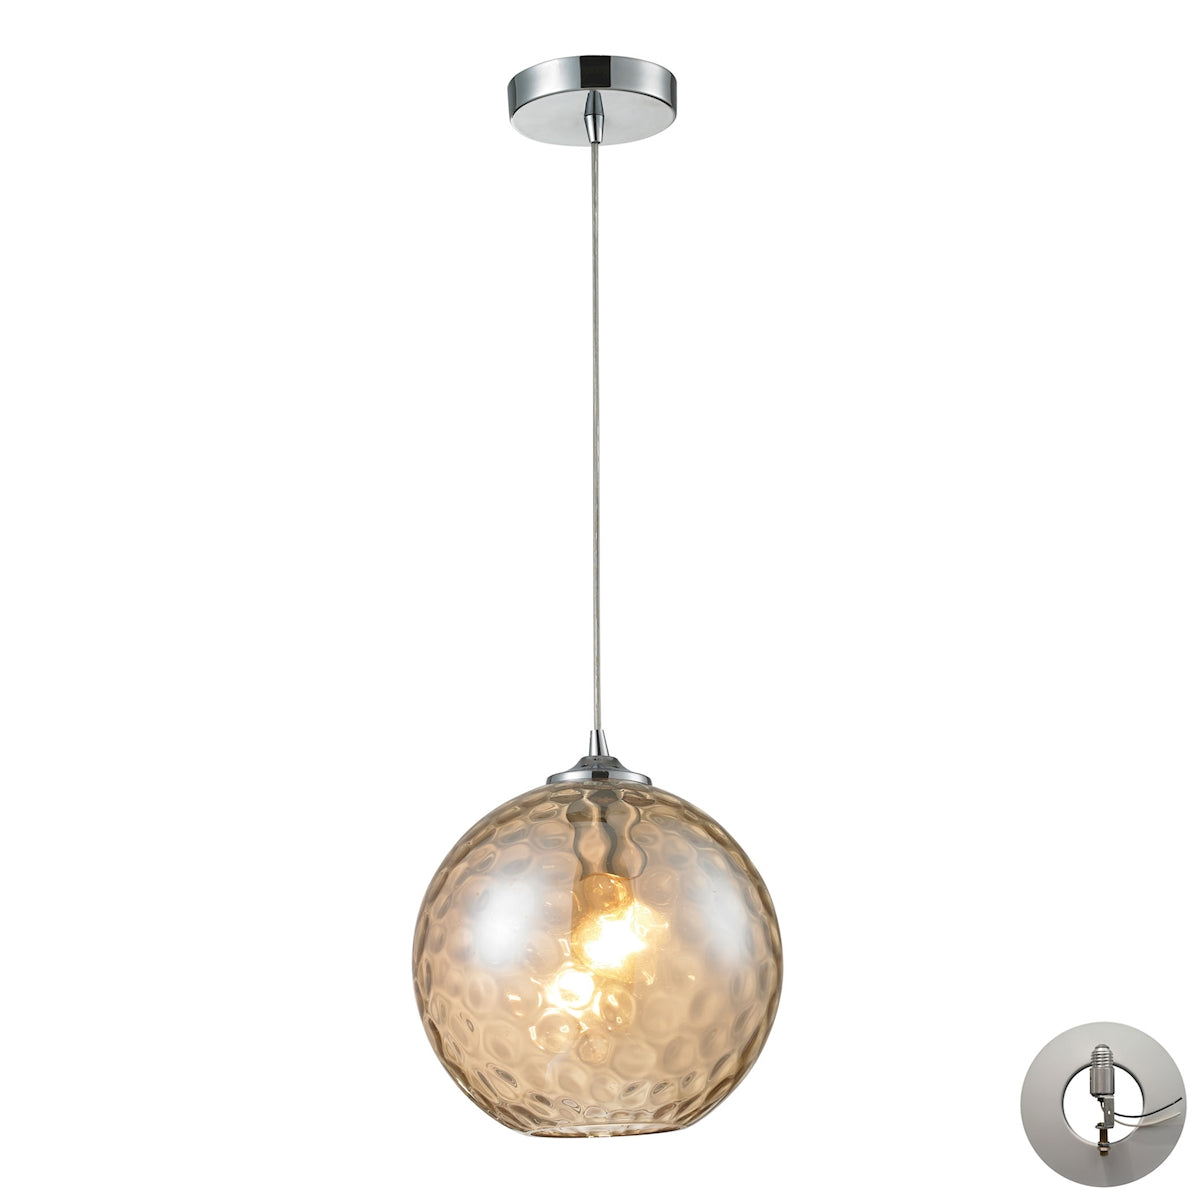 ELK Lighting 31380/1CMP-LA Watersphere 1-Light Mini Pendant in Chrome with Hammered Amber Glass - Includes Adapter Kit